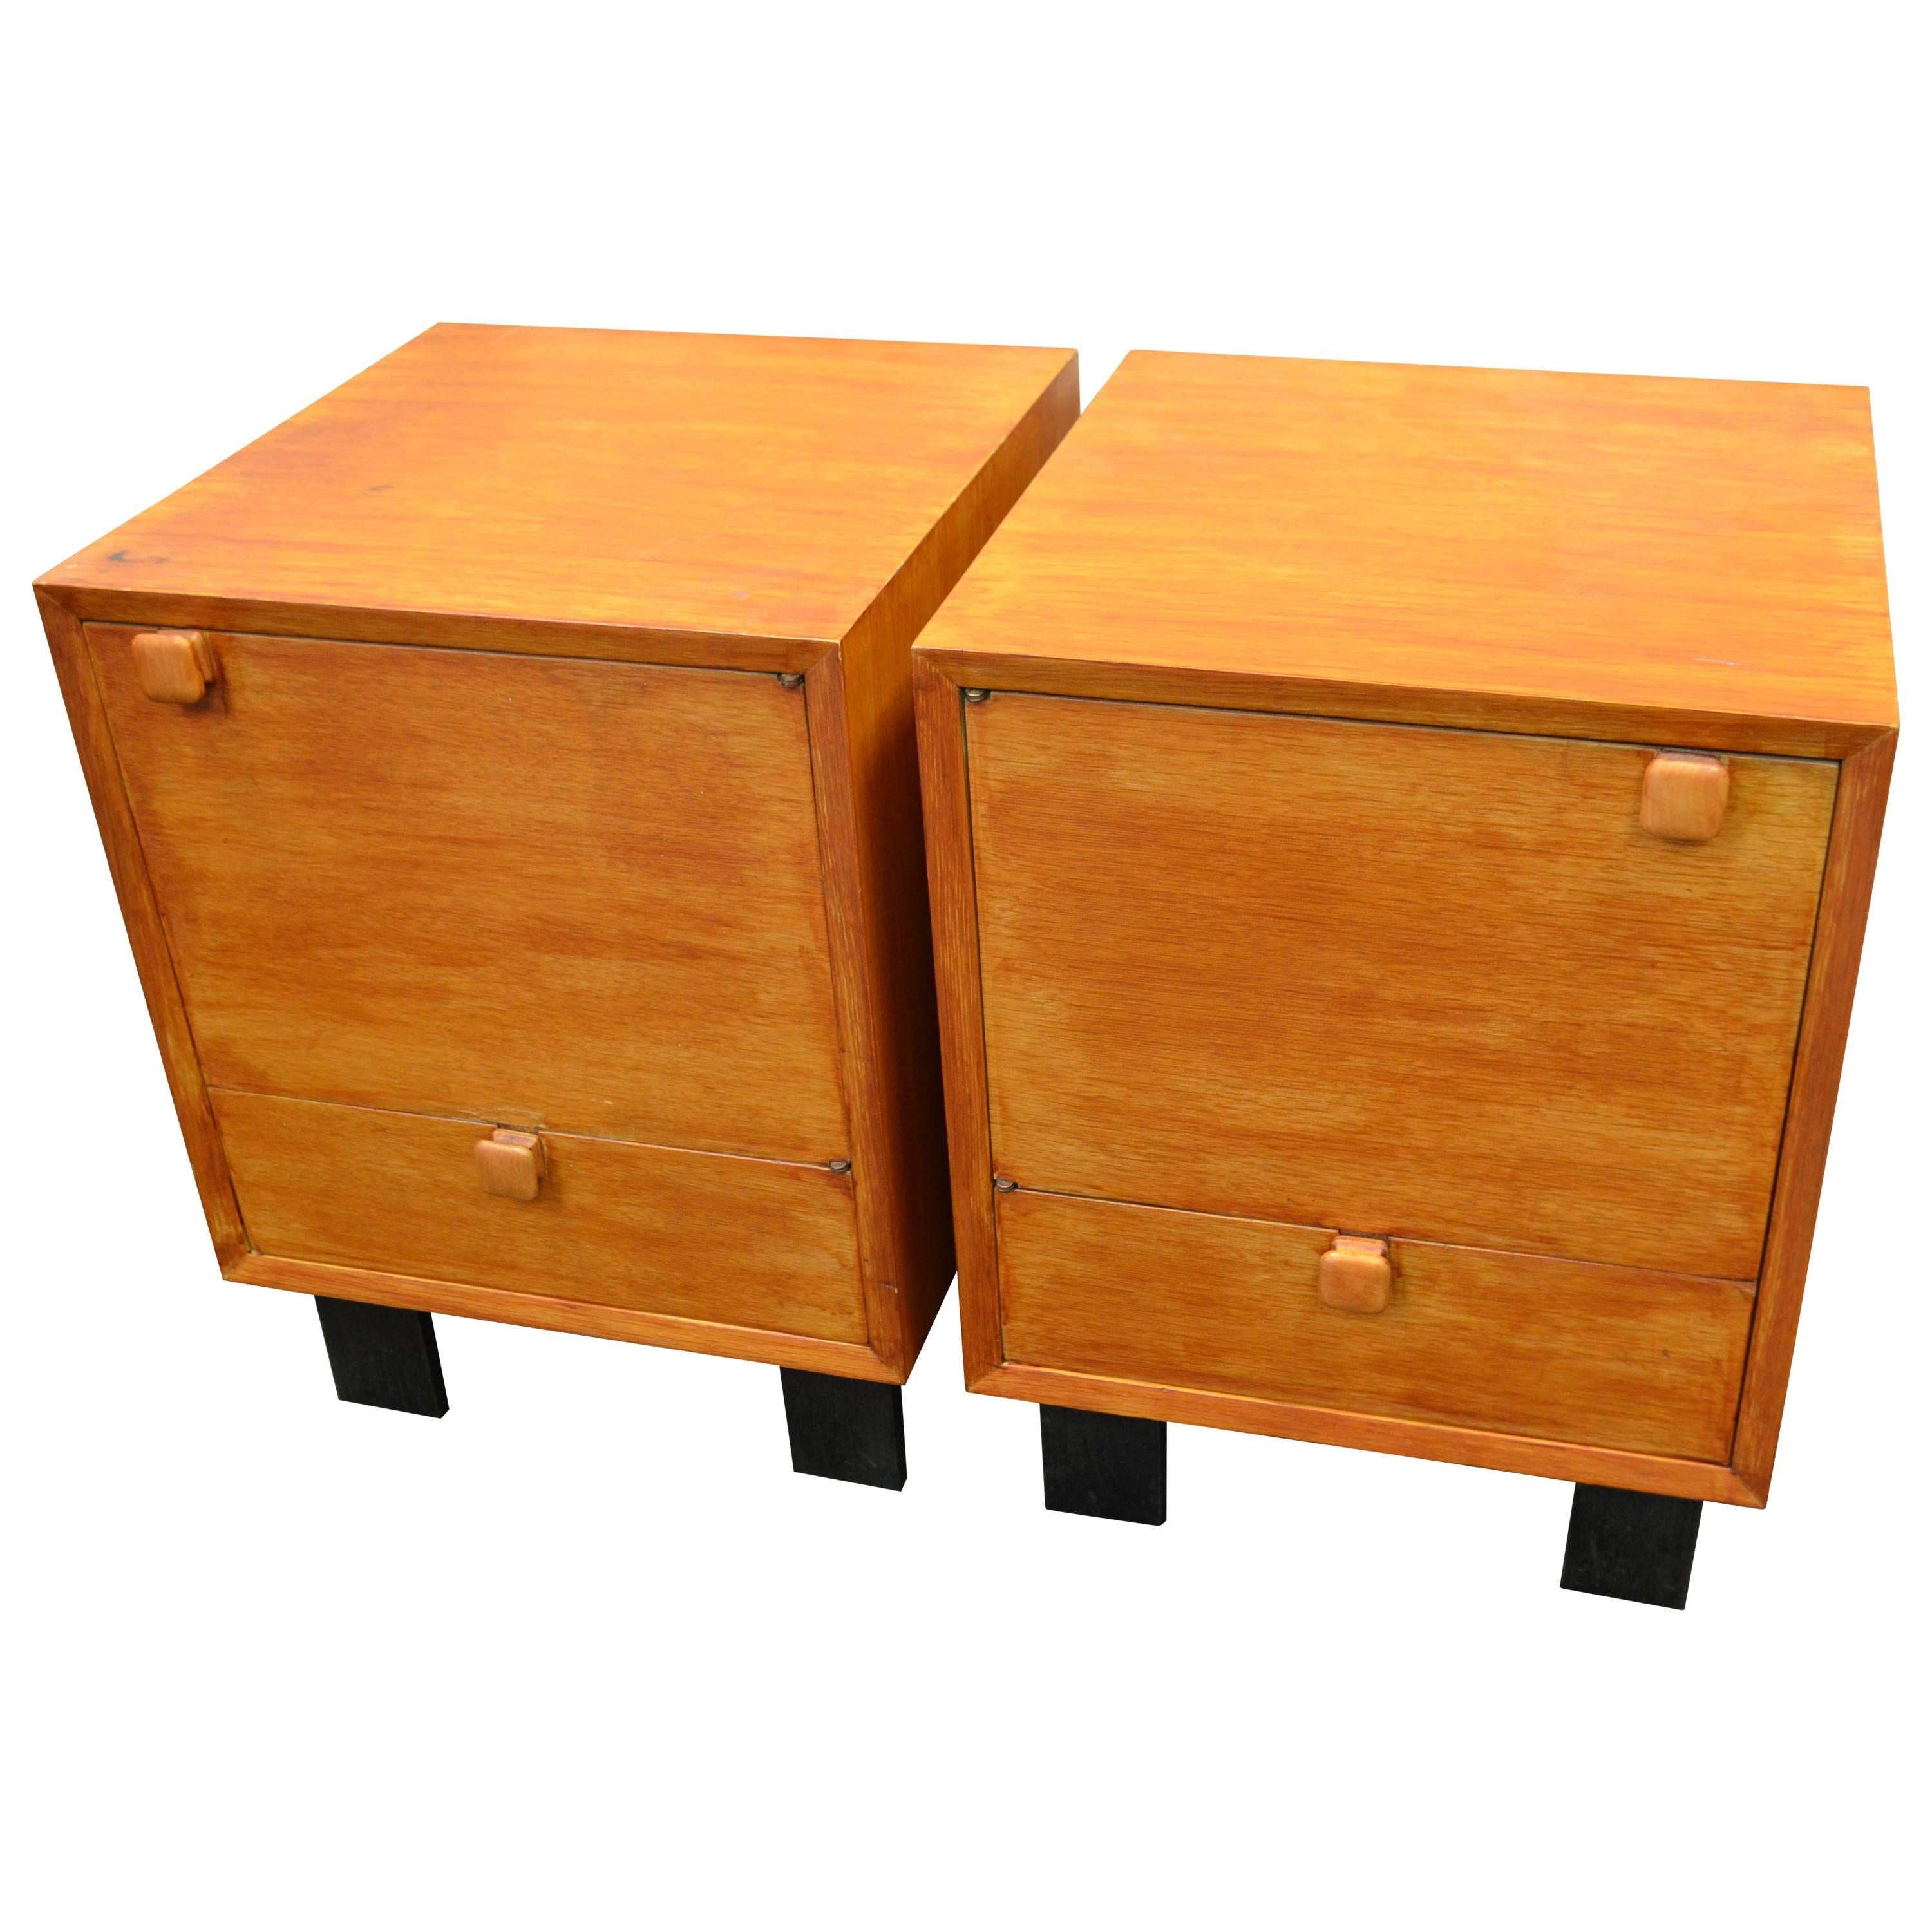 Bedside Tables / Nightstands ‘Pair’ Designed by George Nelson for Herman Miller